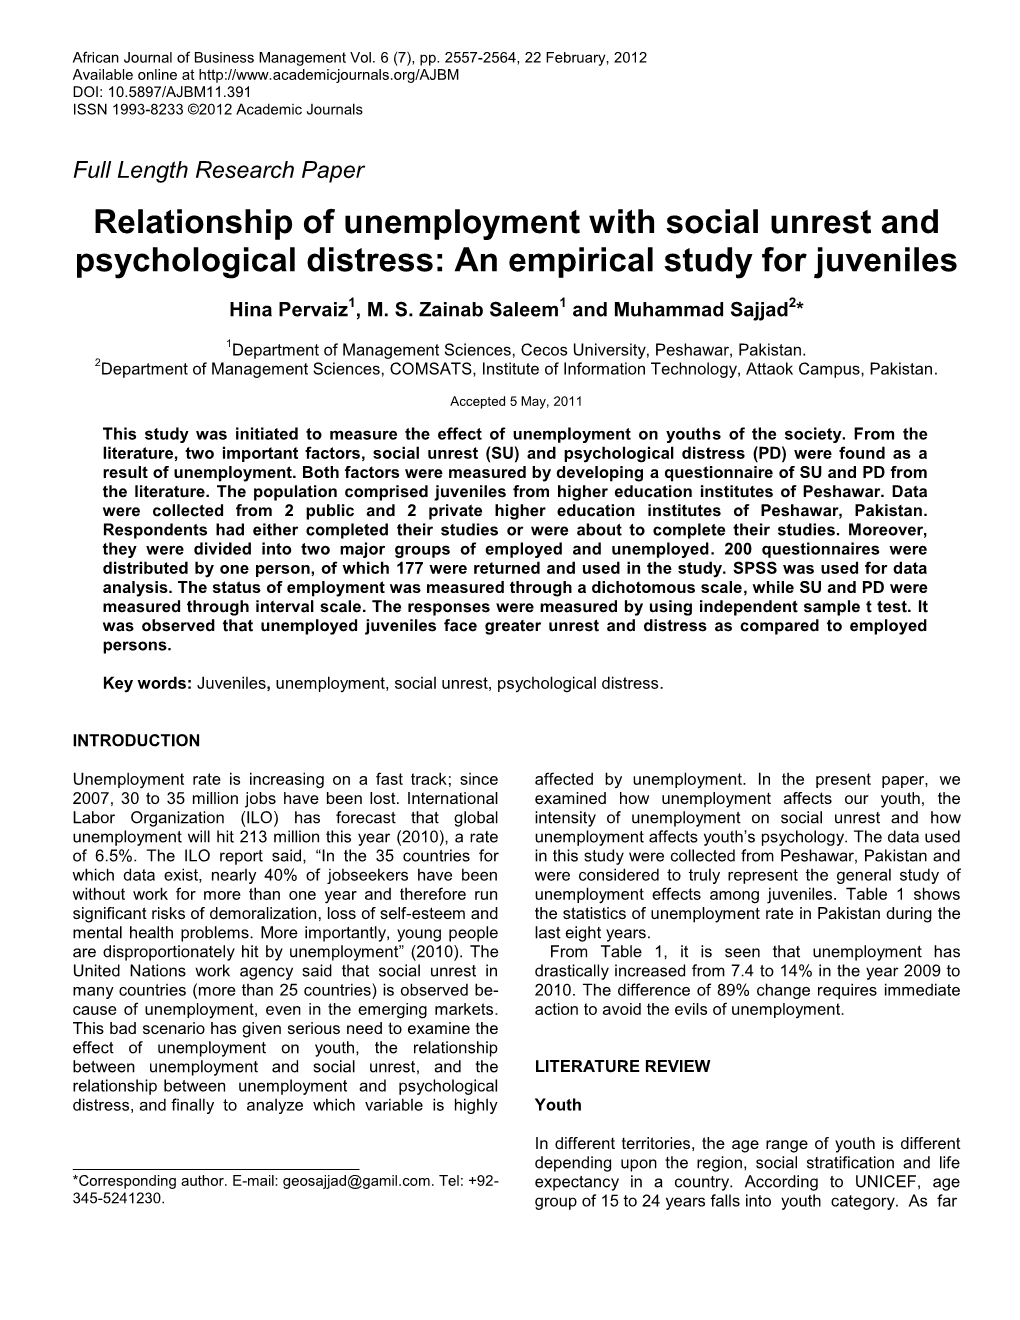 Relationship of Unemployment with Social Unrest and Psychological Distress: an Empirical Study for Juveniles